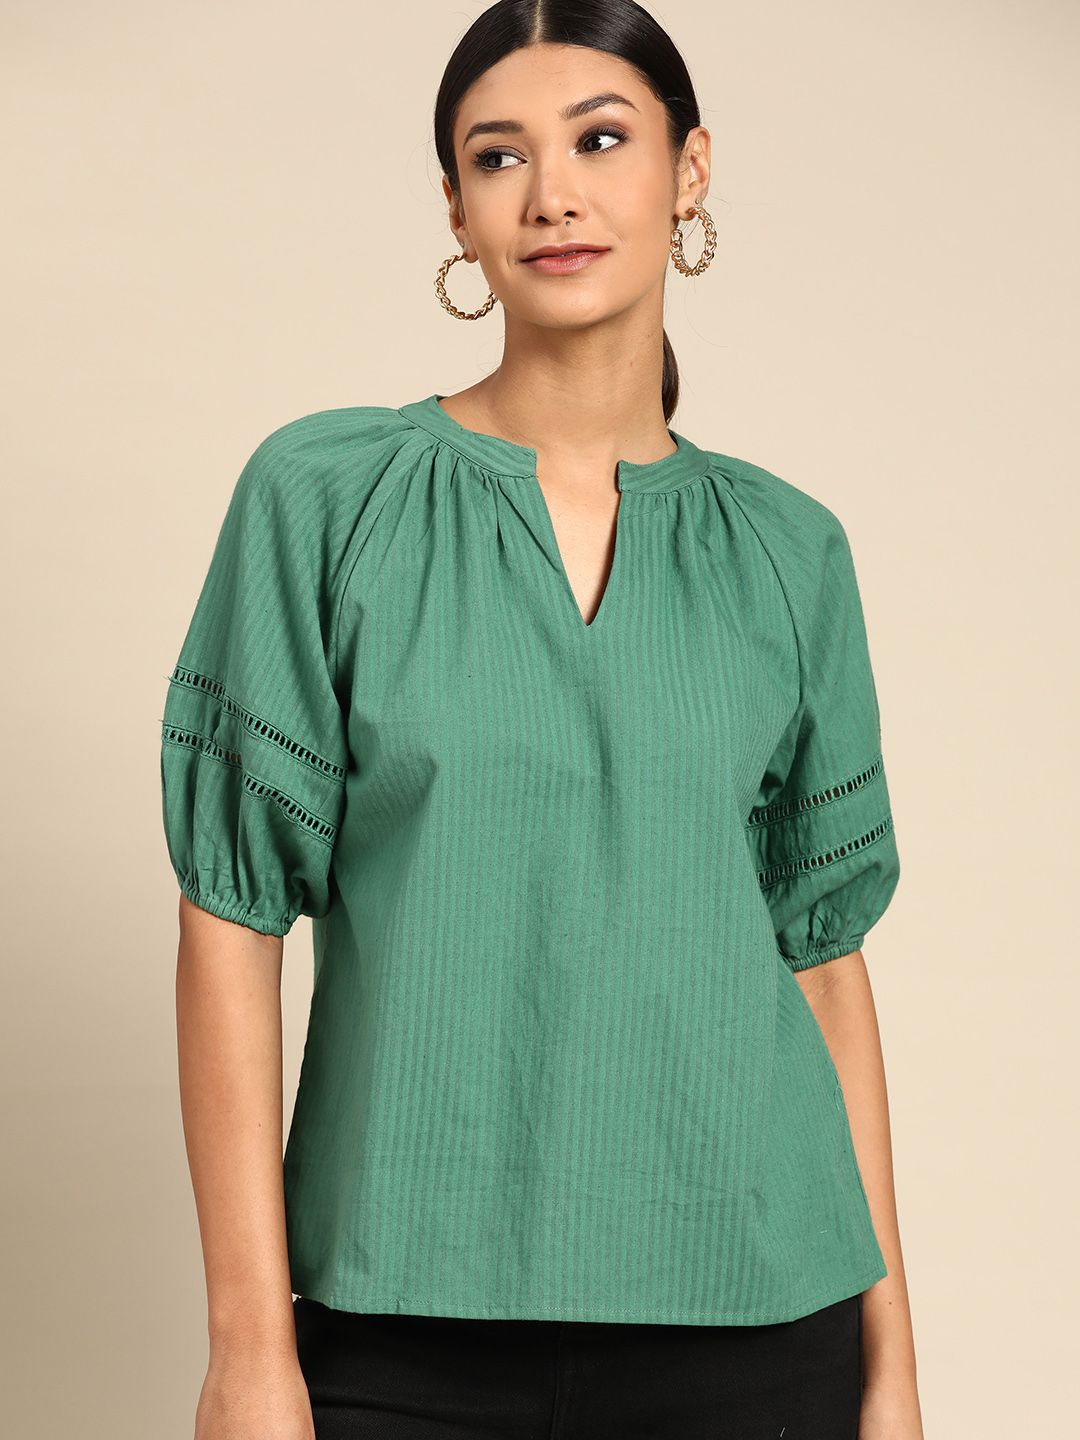 all about you Women Green Self-Striped Pure Cotton Top Price in India